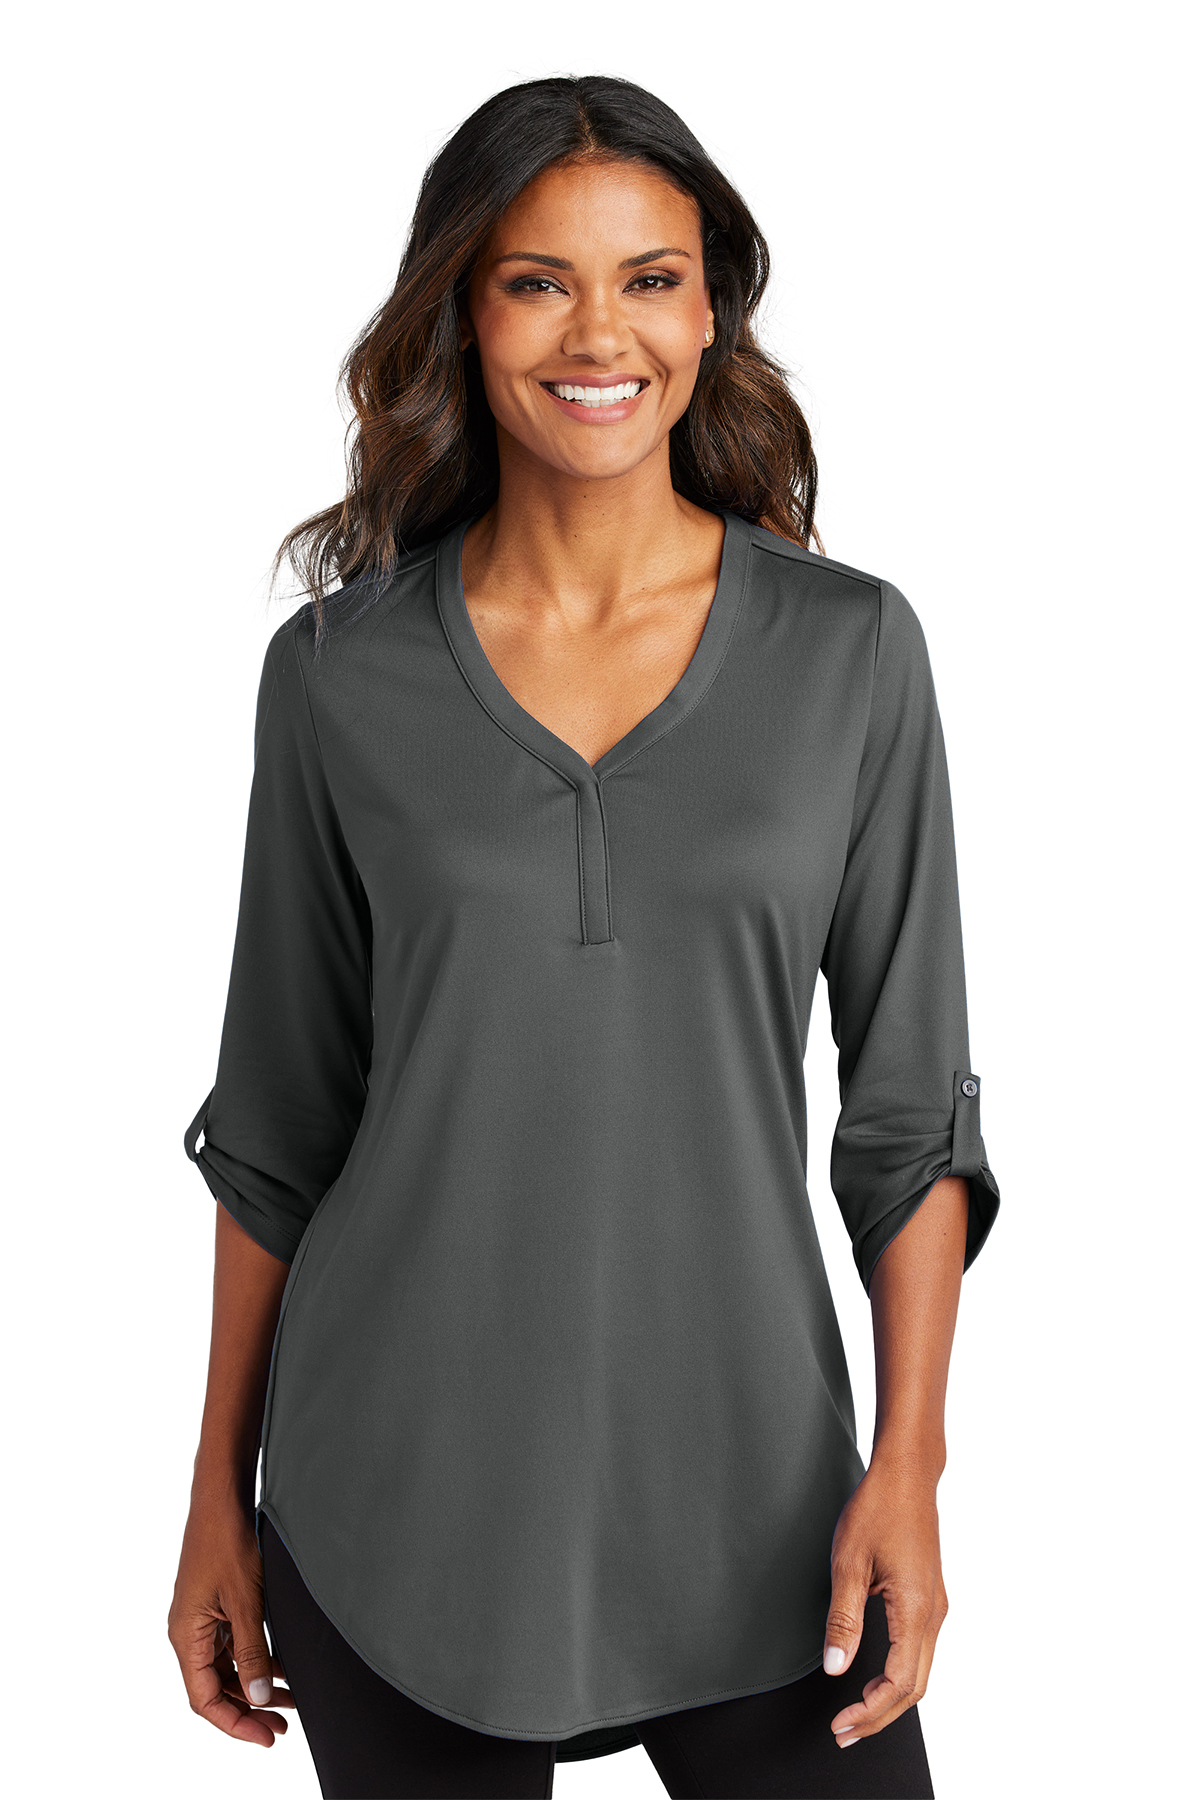 Port Authority Ladies Concept Stretch V-Neck Tee, Product